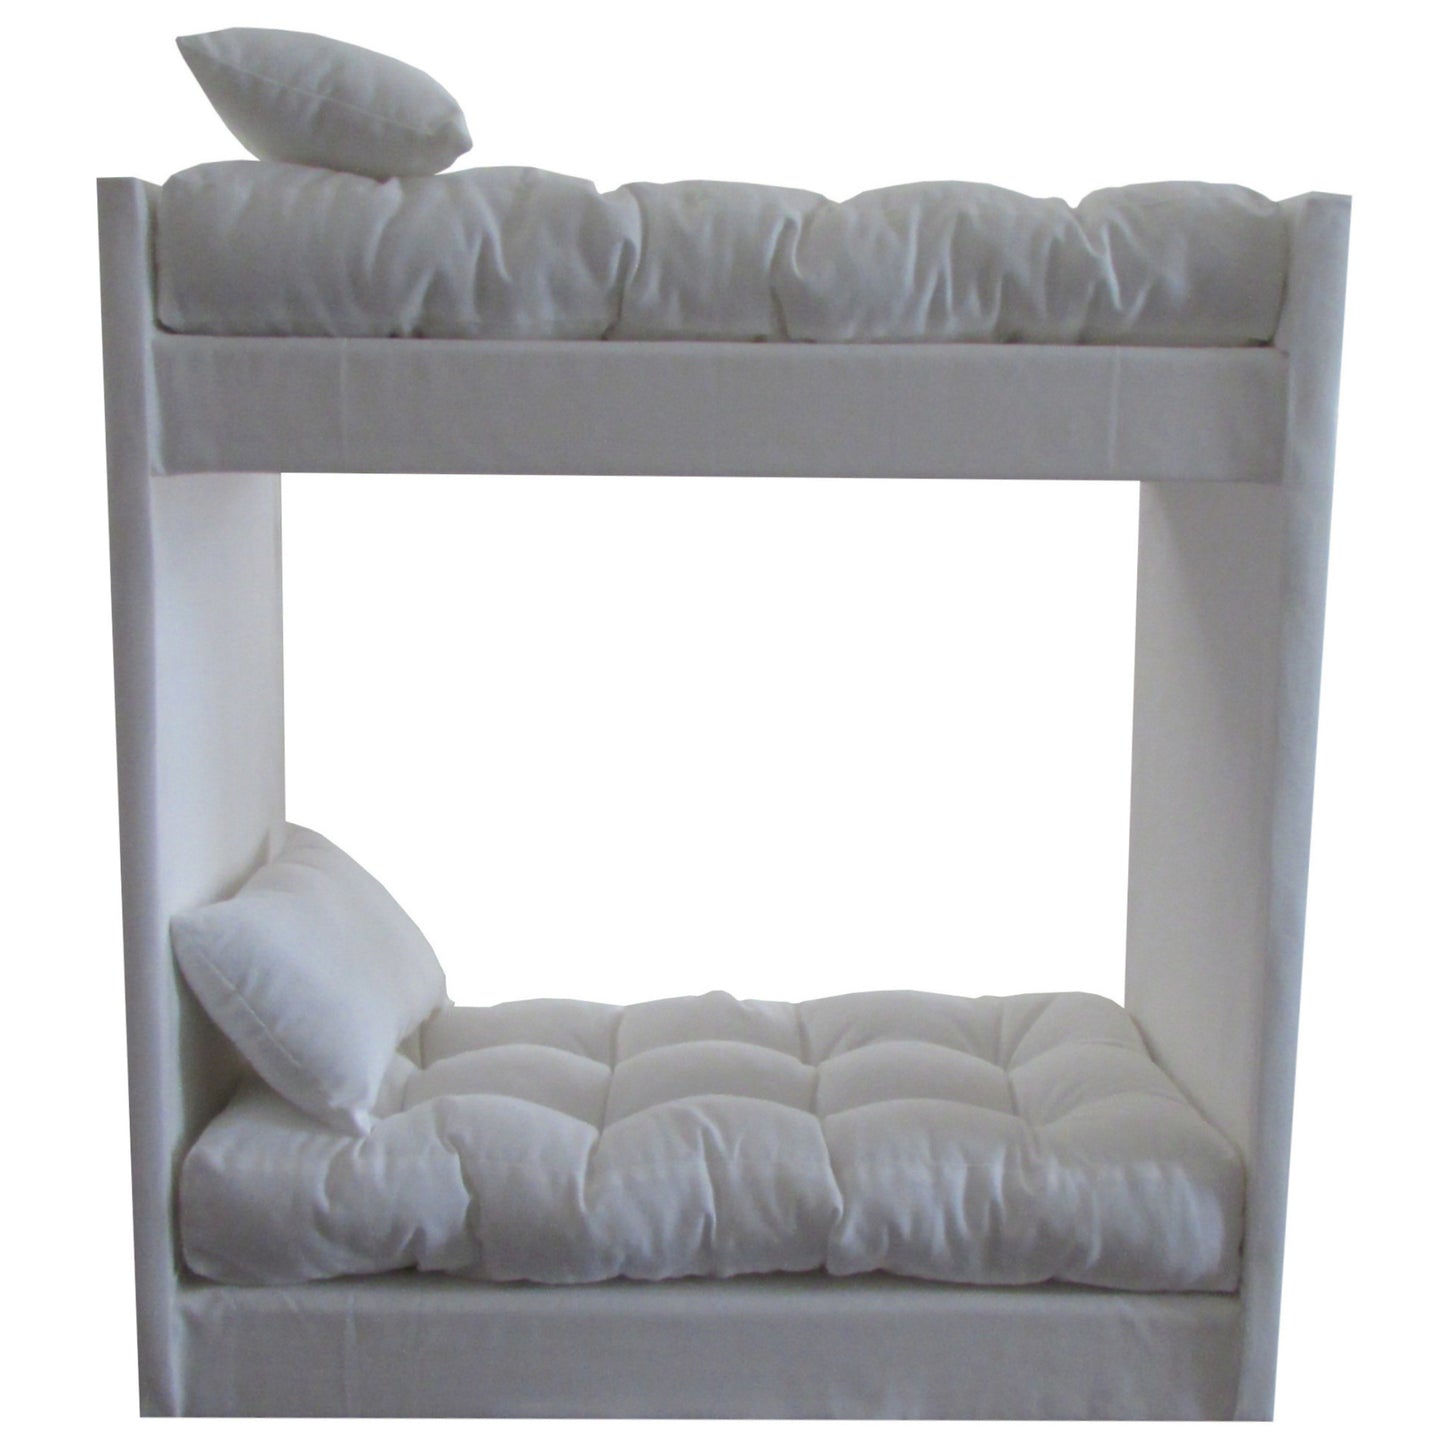 Upholstered White Doll Bunk Bed for 18-inch dolls